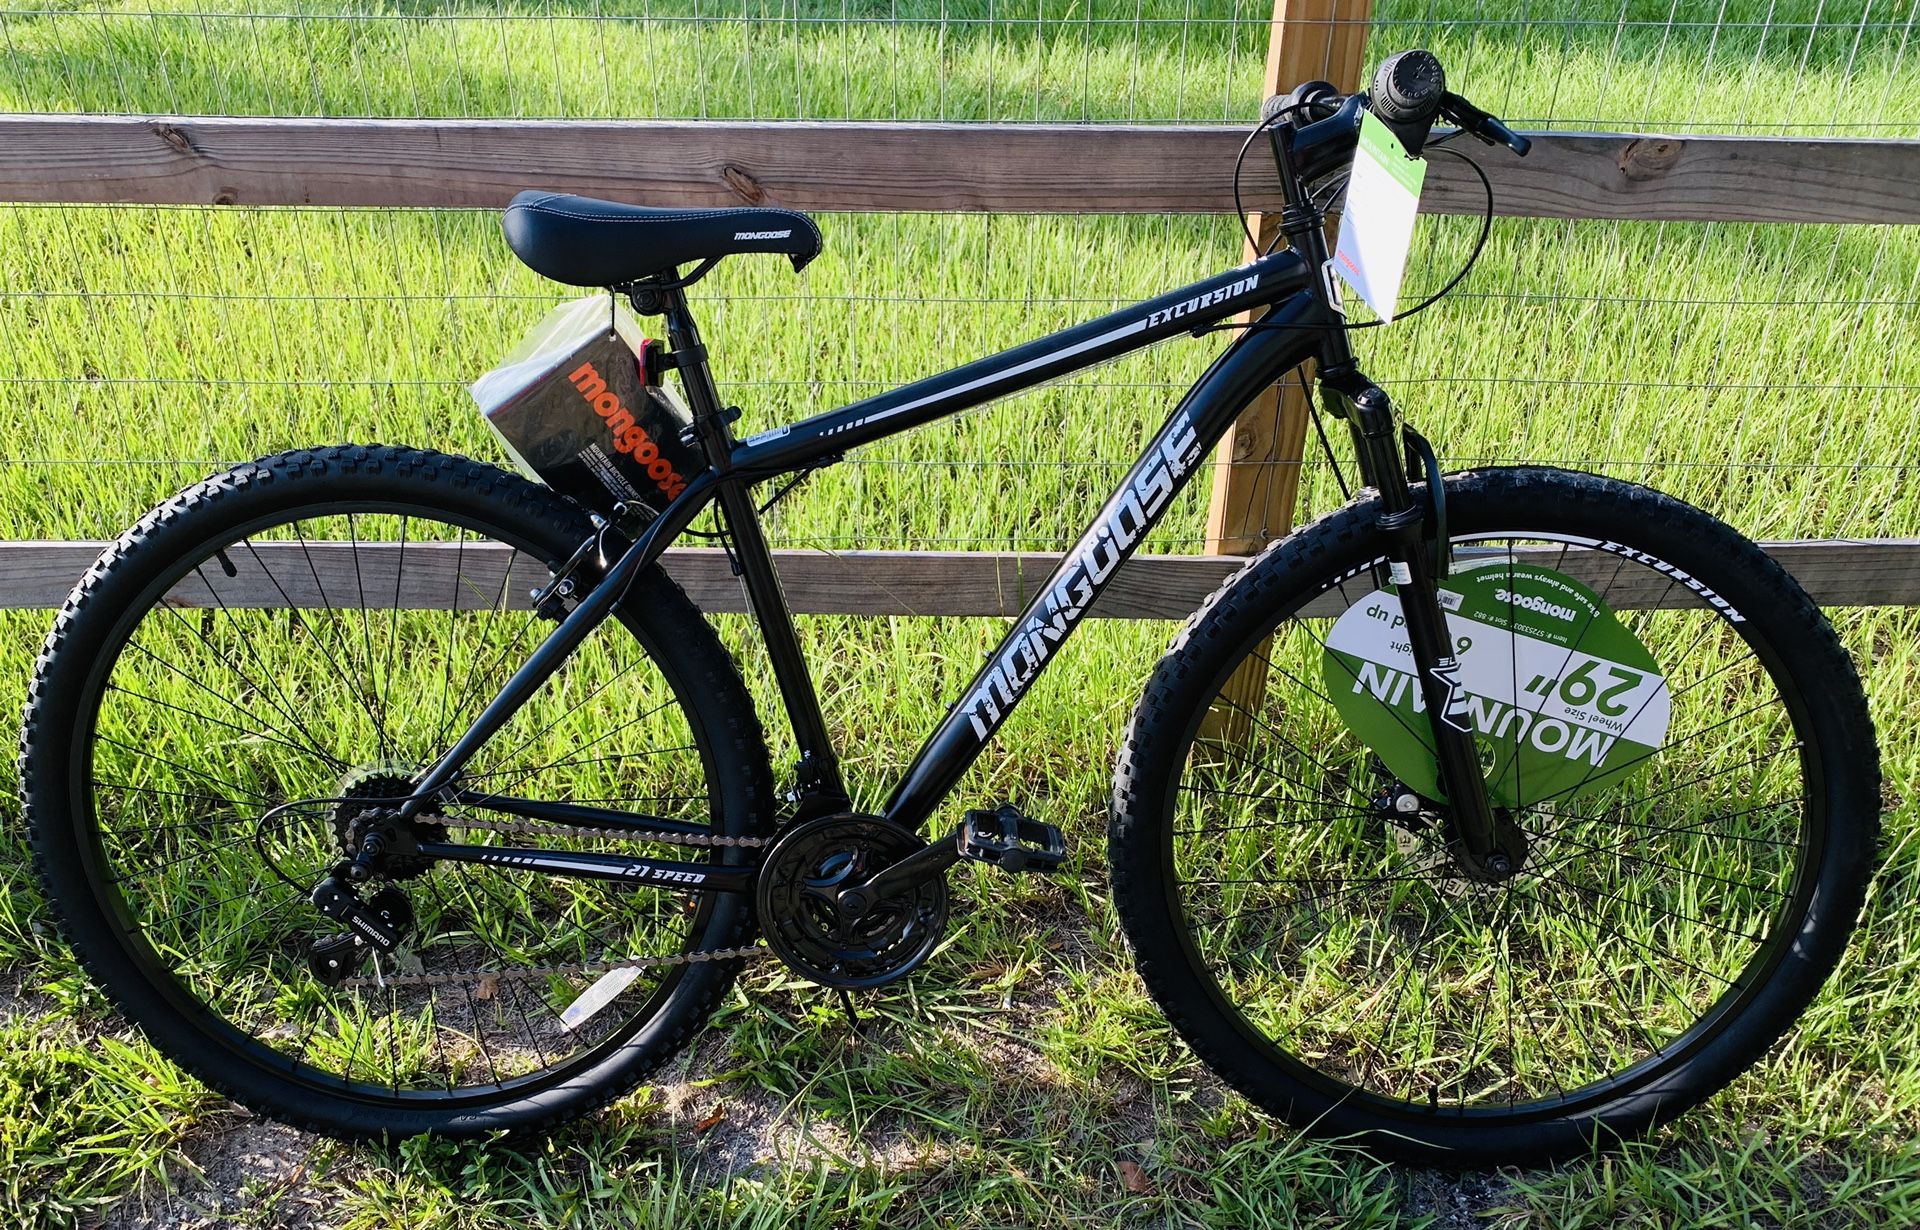 Brand New Tall Mans Bike 29” Tires for Someone 6Ft or Taller